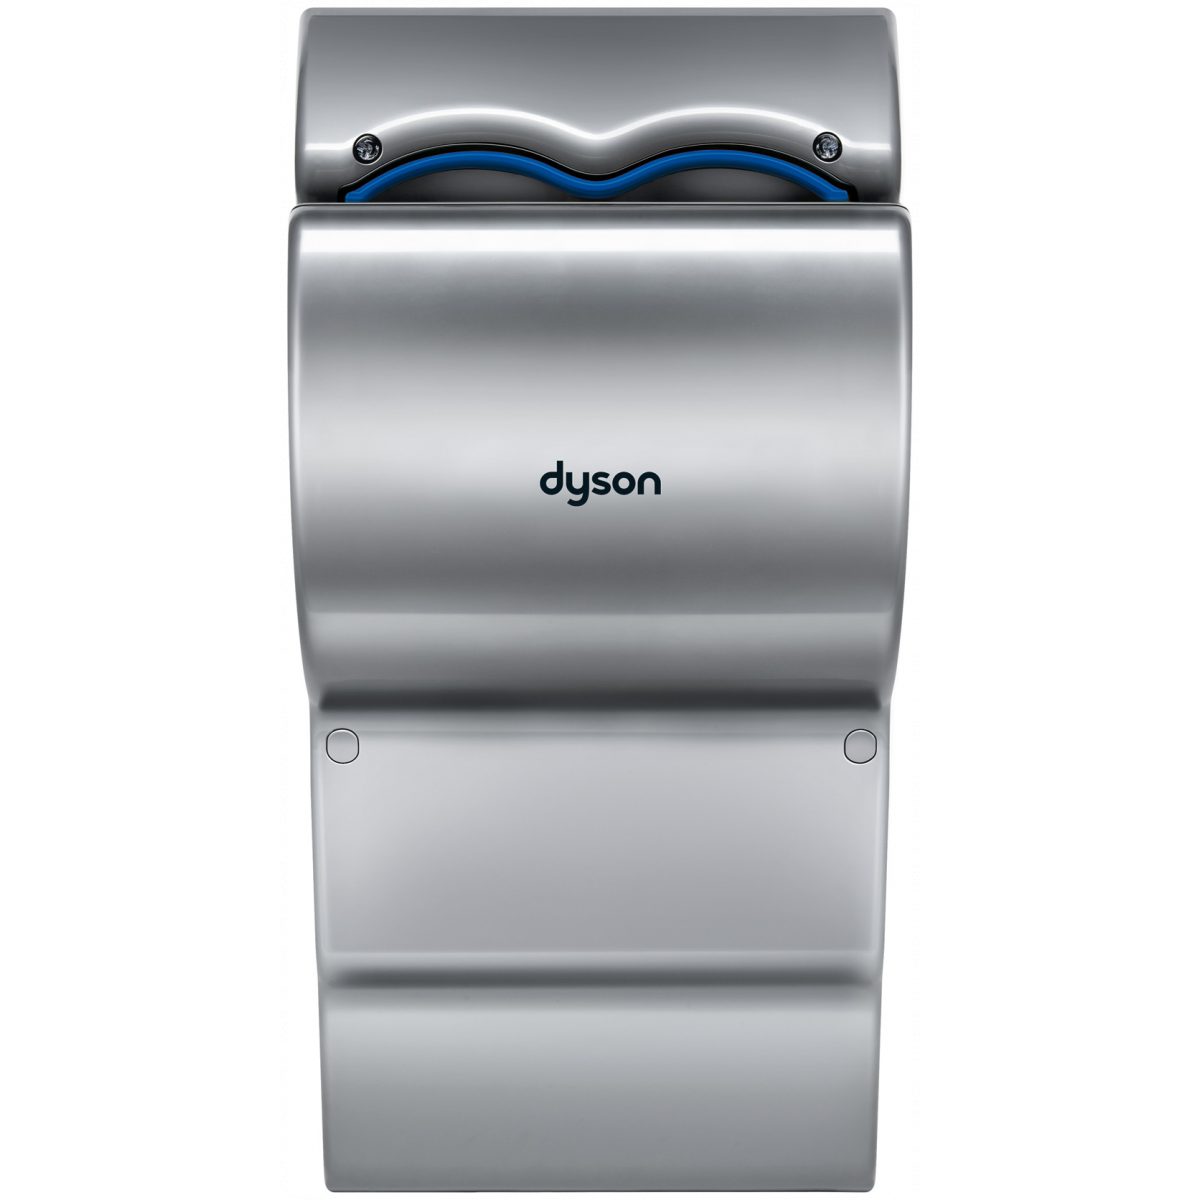 dyson airblade v hand dryer specifications